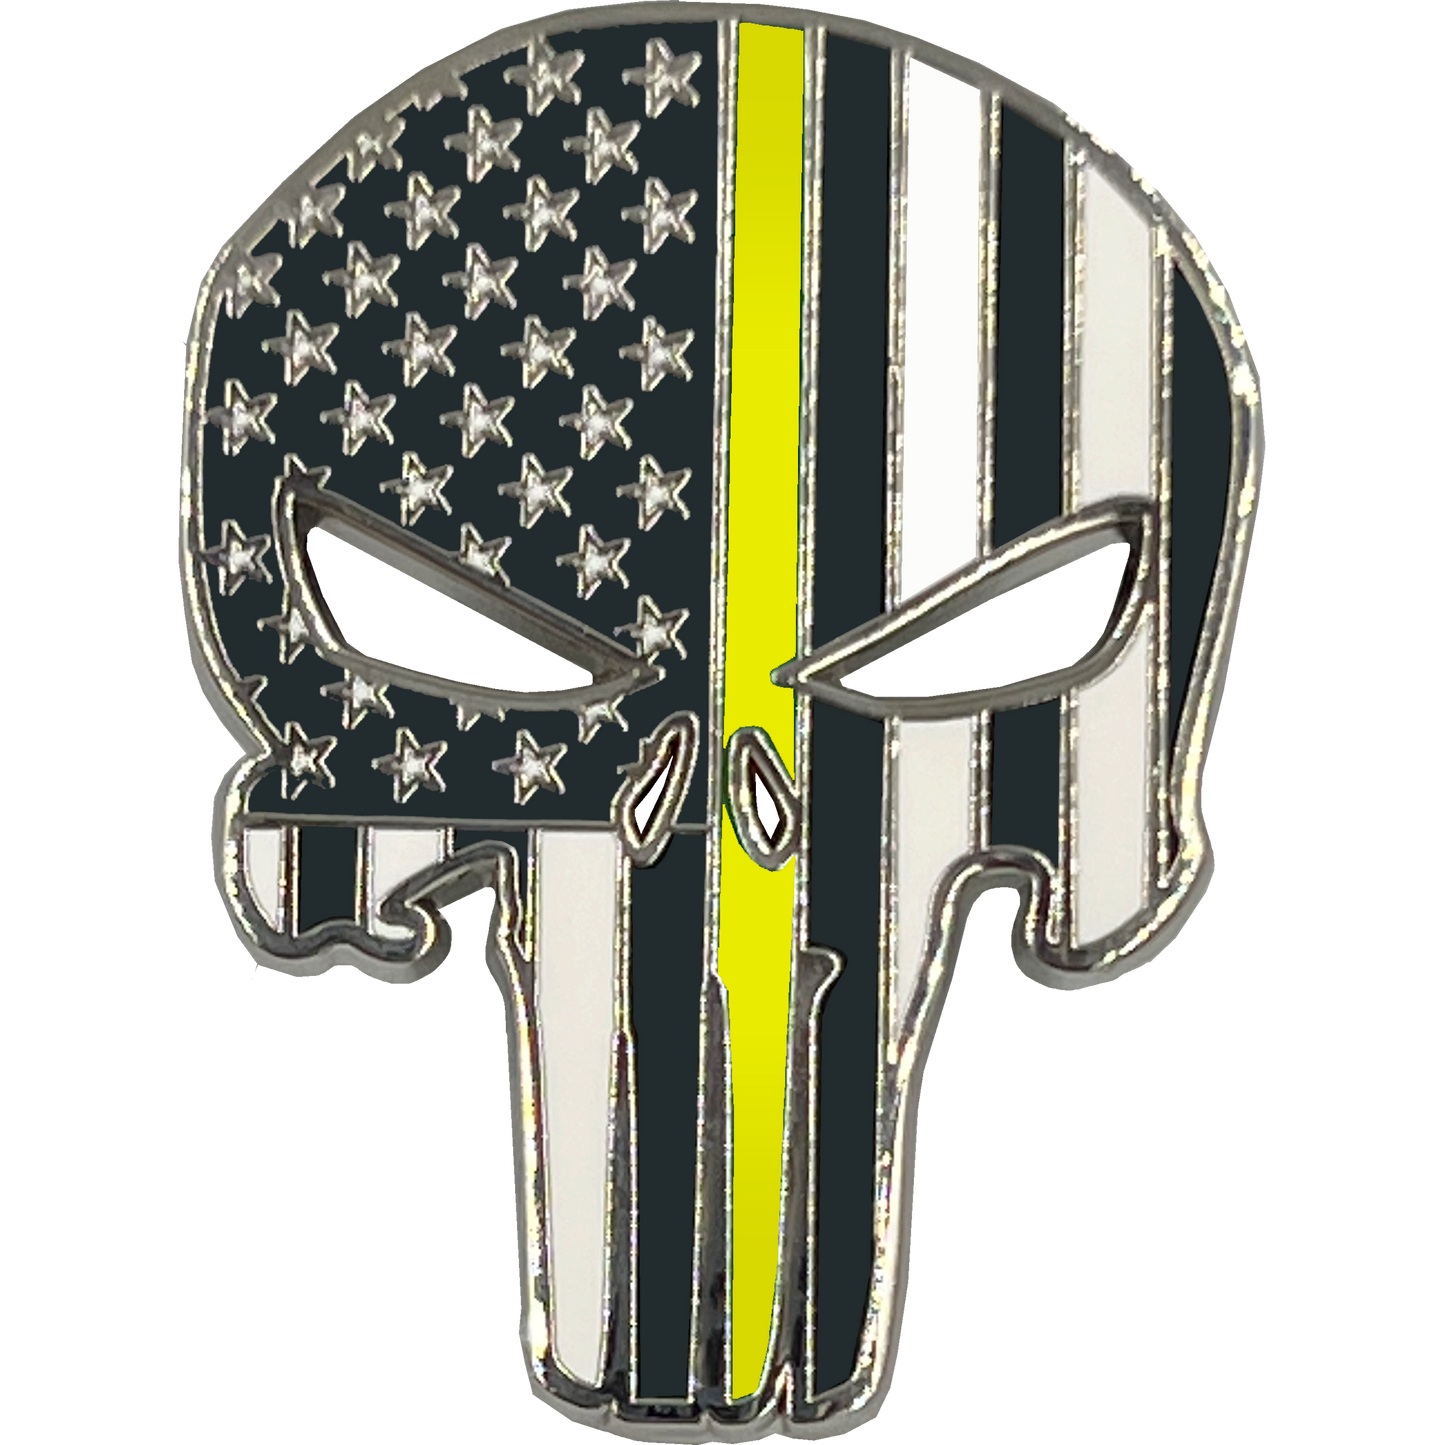 PBX-003-A Thin Gold Line American Flag Pin Police Emergency 911 Dispatcher with die-cut eyes yellow trucker and dual pin posts and deluxe locking clasps